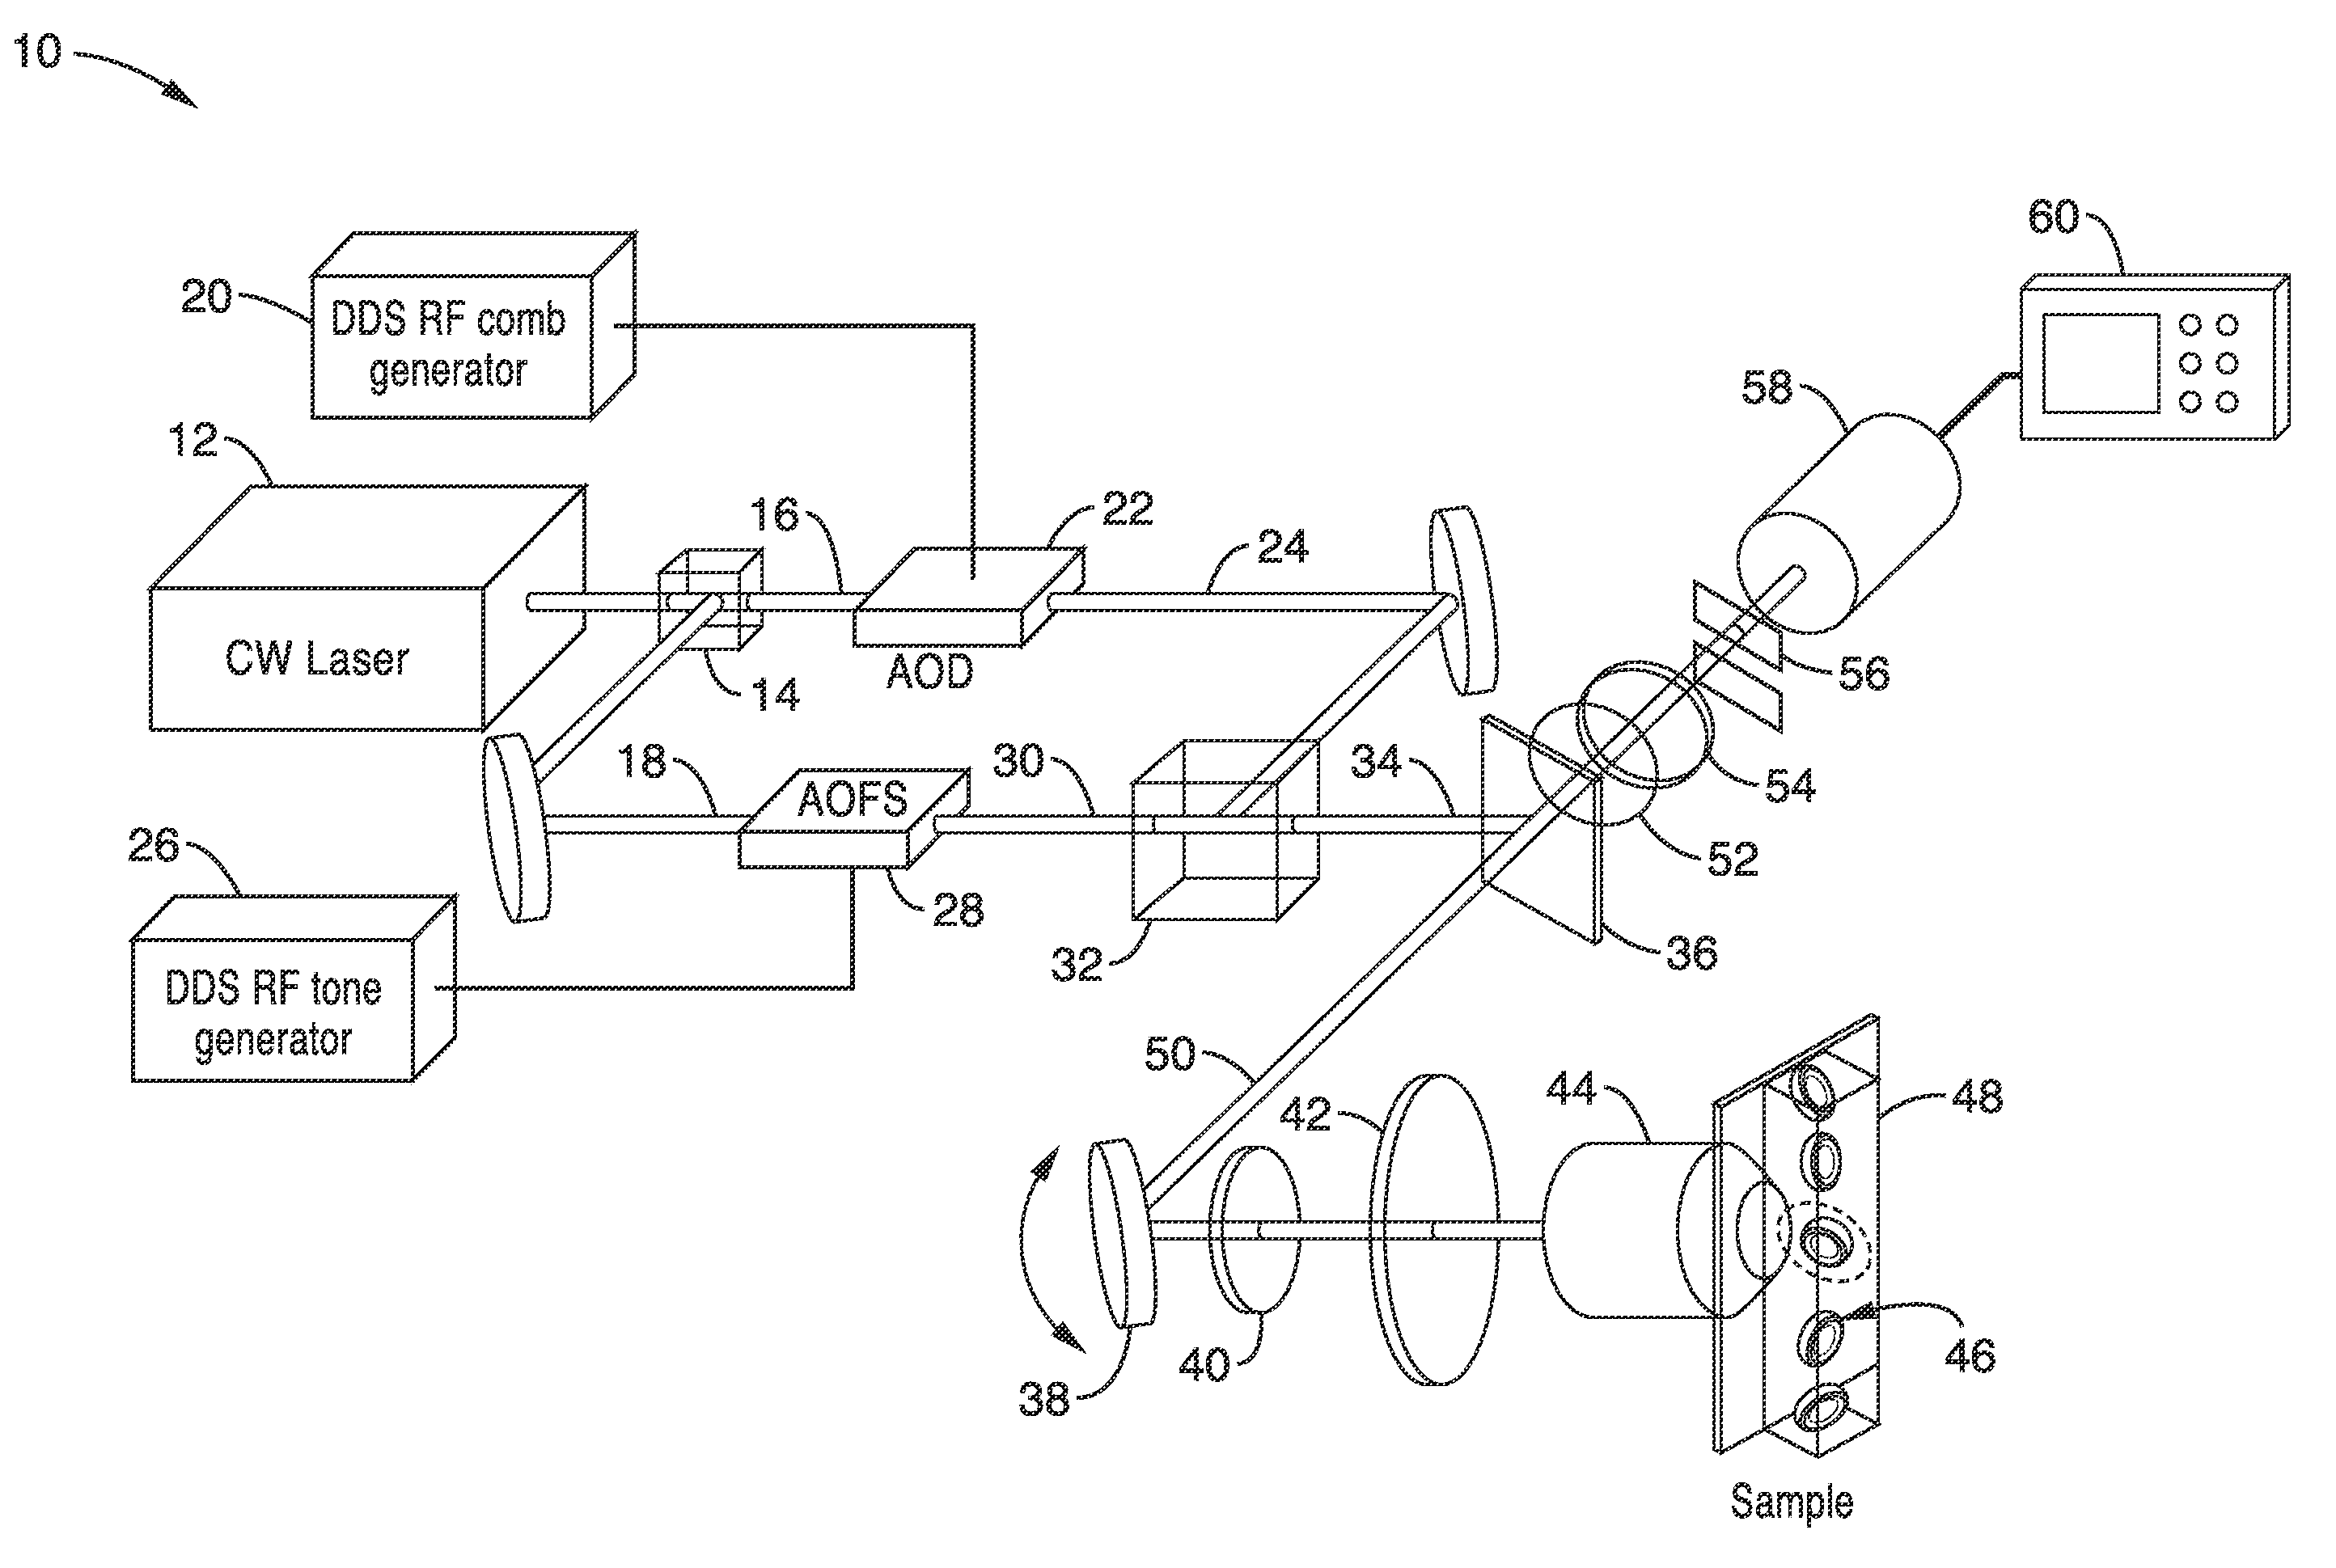 Apparatus and methods for fluorescence imaging using radiofrequency-multiplexed excitation